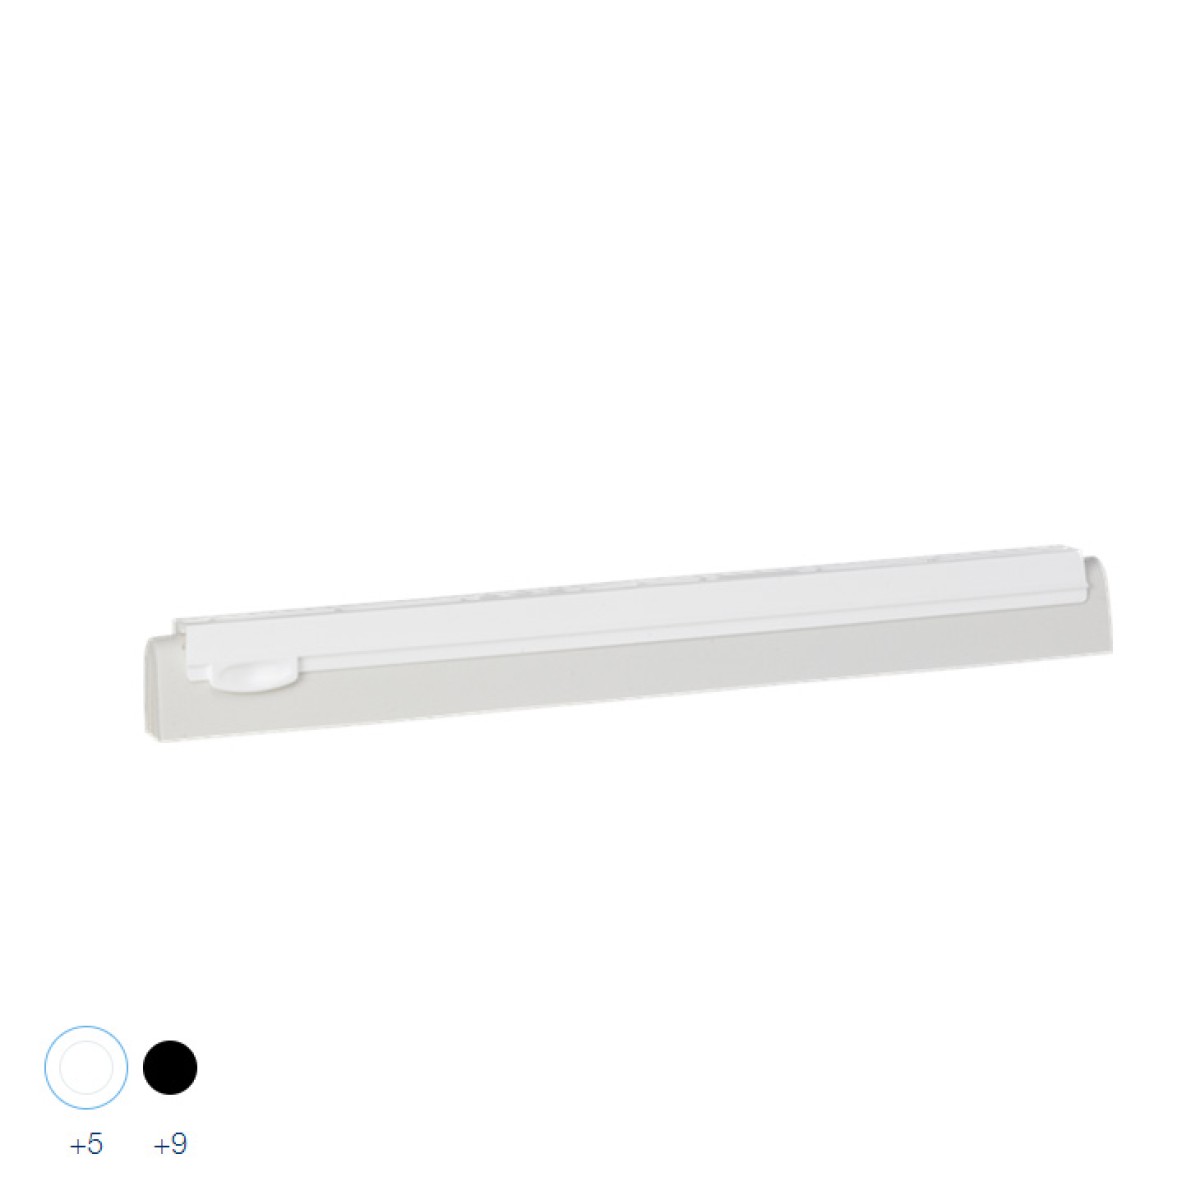 SQUEEGEE BLADE - 77725 WHITE 400mm